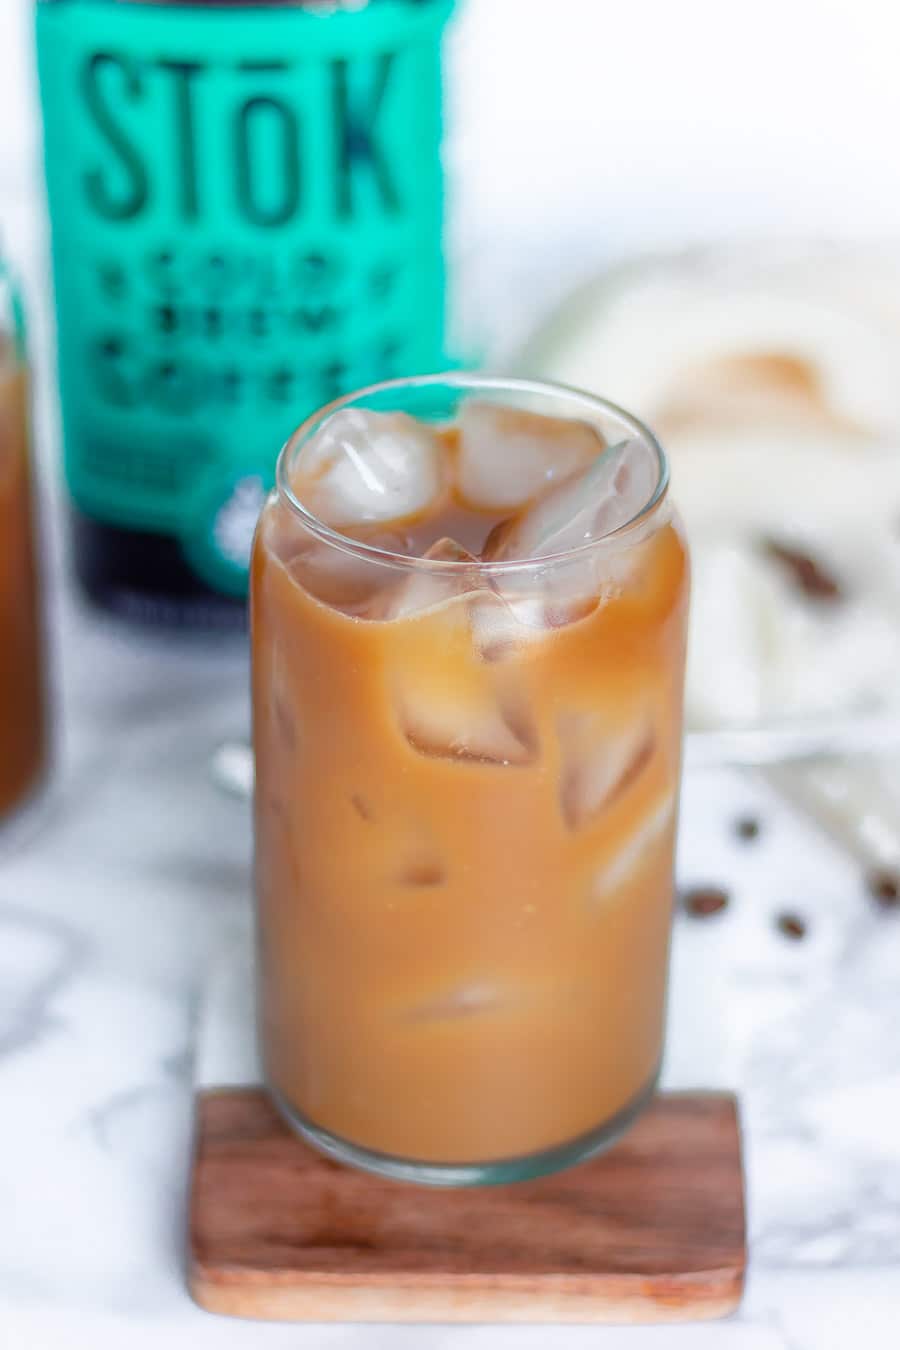 I like a good imitation Starbucks recipe. When I tried the Starbucks honey almond milkshake for the first time, I knew I needed to make it at home. This imitation Starbucks honey almond cold milkshake recipe will absolutely be my summer cold brew.